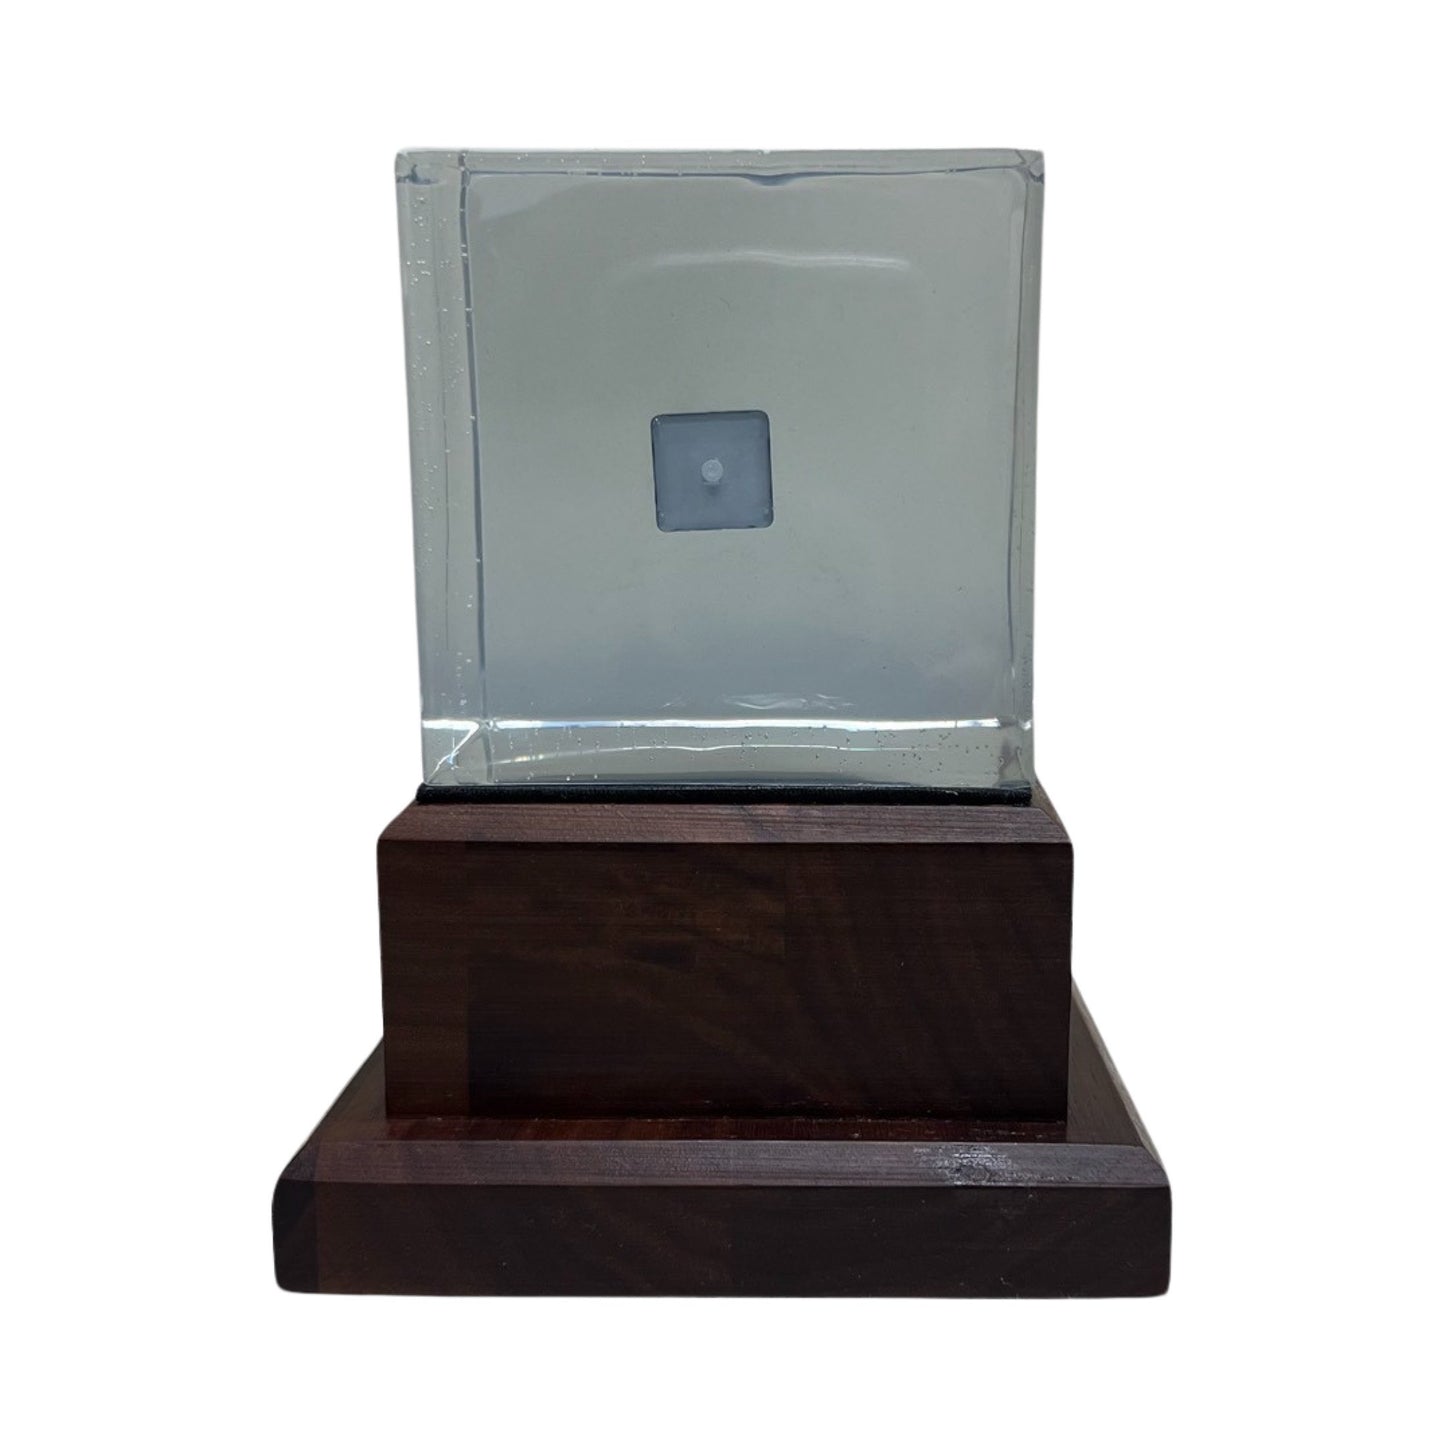 Ted, thank you for being our fan | Engraved Plate on Natural Walnut Base with Leather | Luxury, Archival Packaging